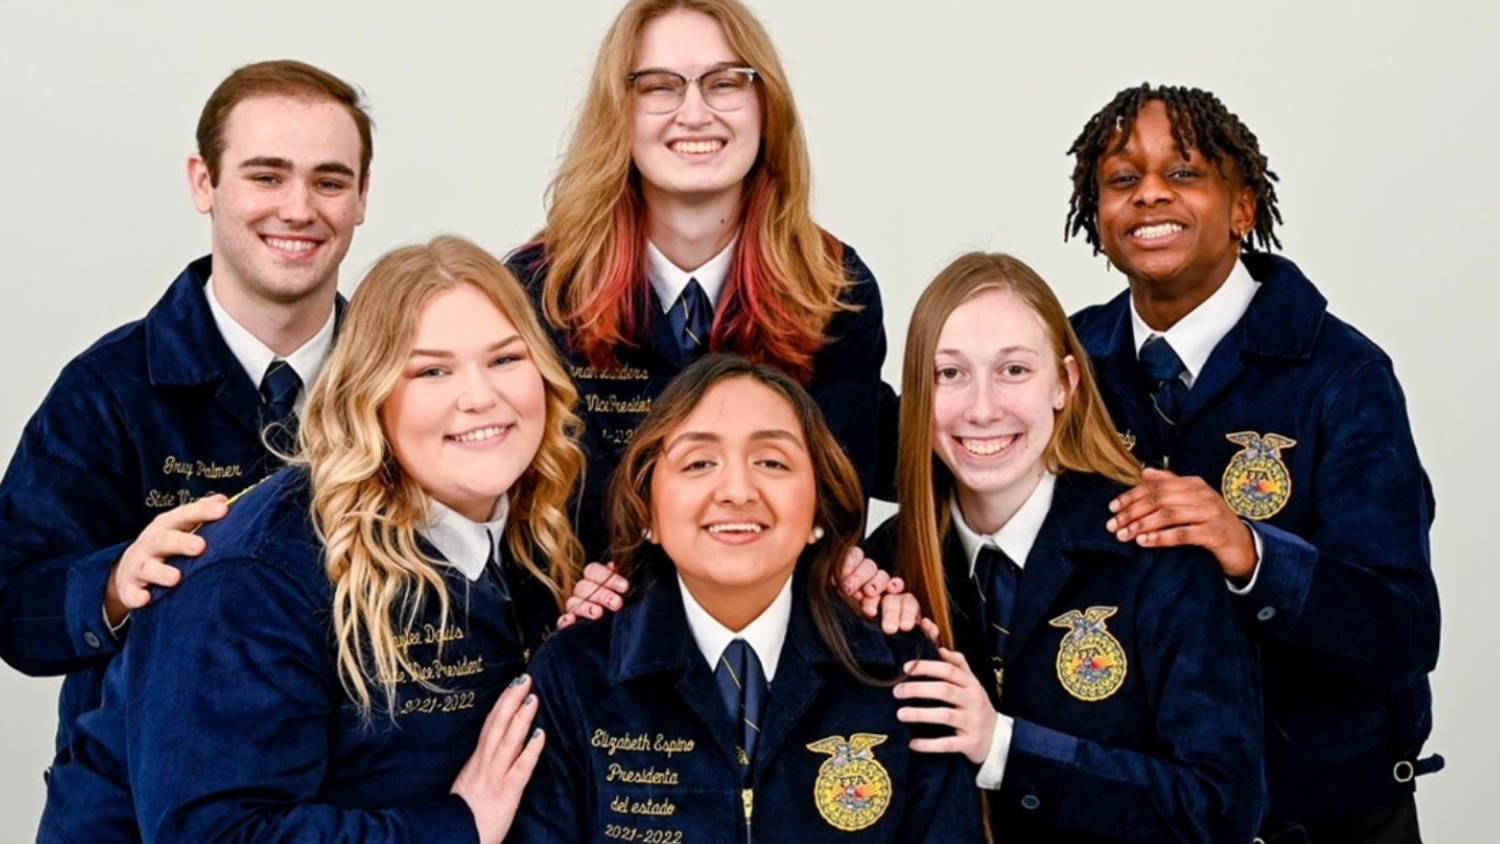 The 2021 NC FFA state officers smiling and wearing blue corduroy jackets.